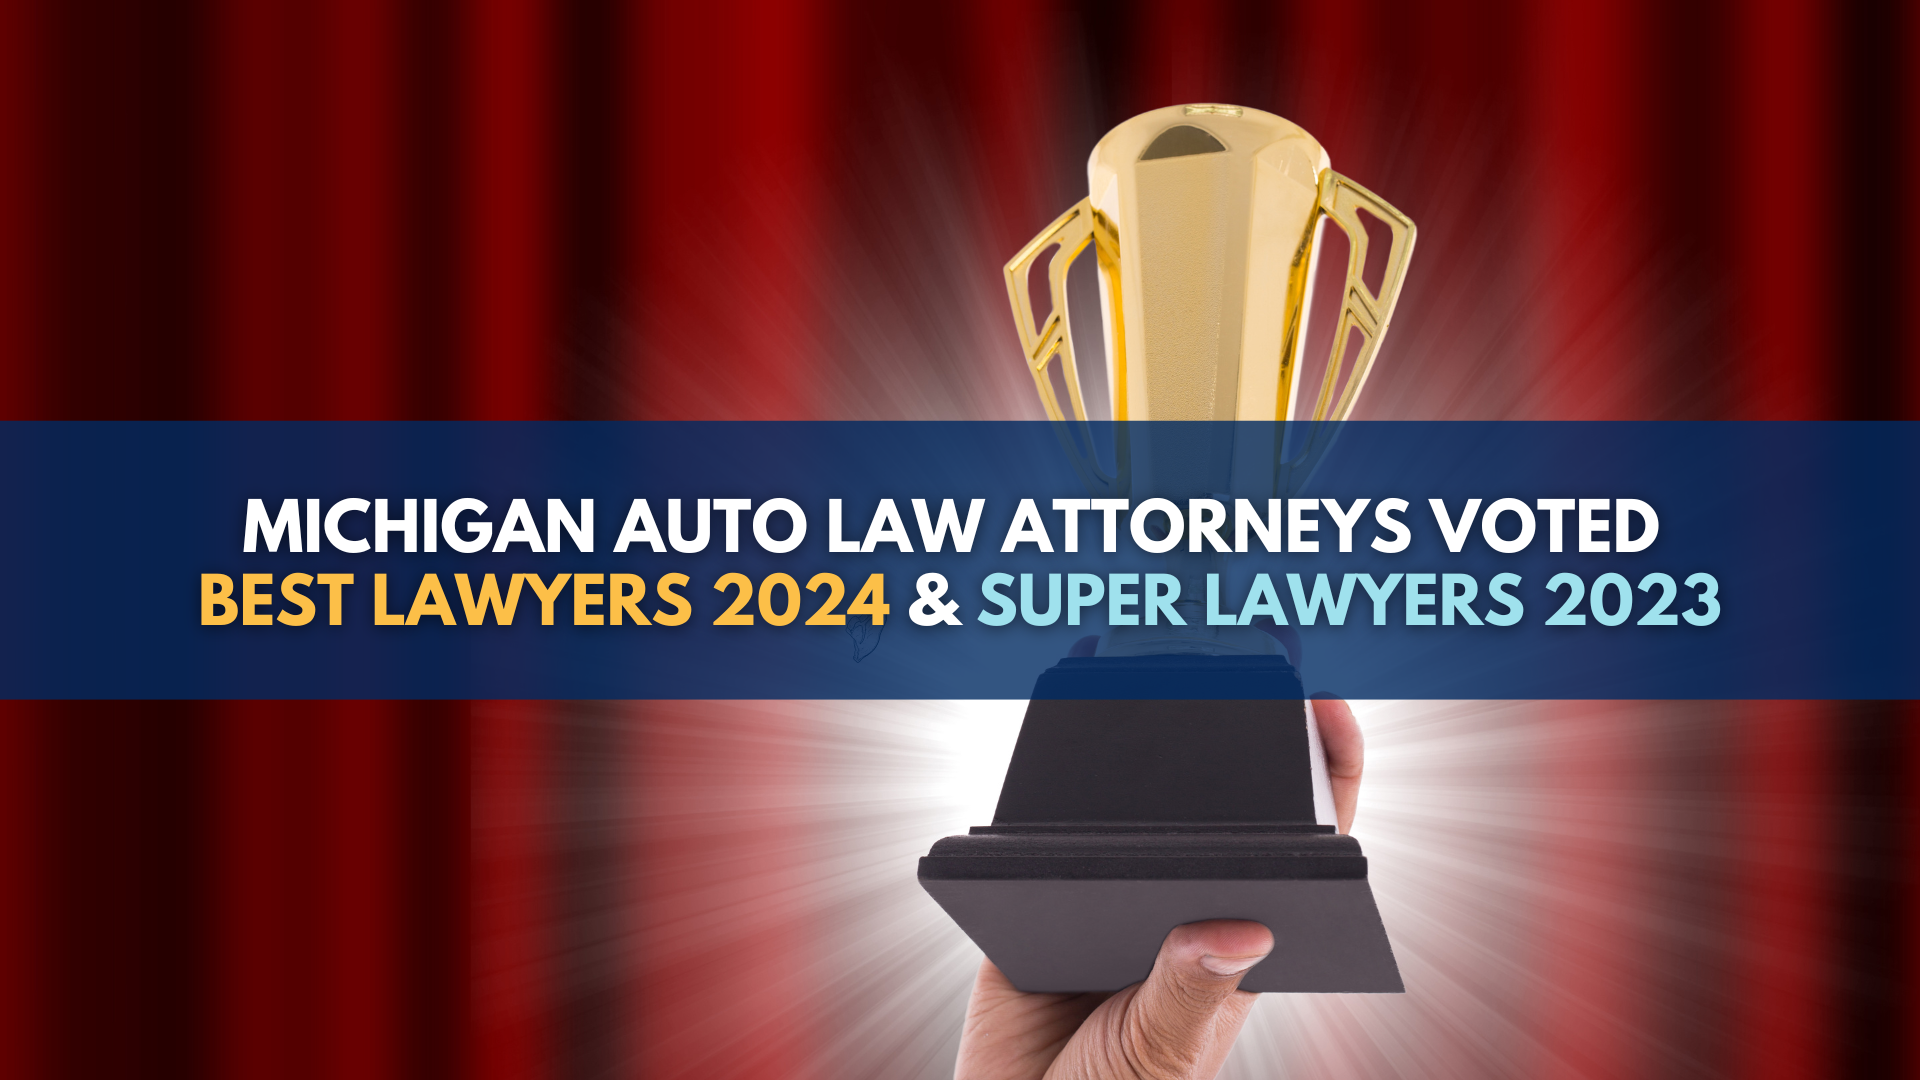 Michigan Auto Law Attorneys Voted Best Lawyers 2024 and Super Lawyers 2023